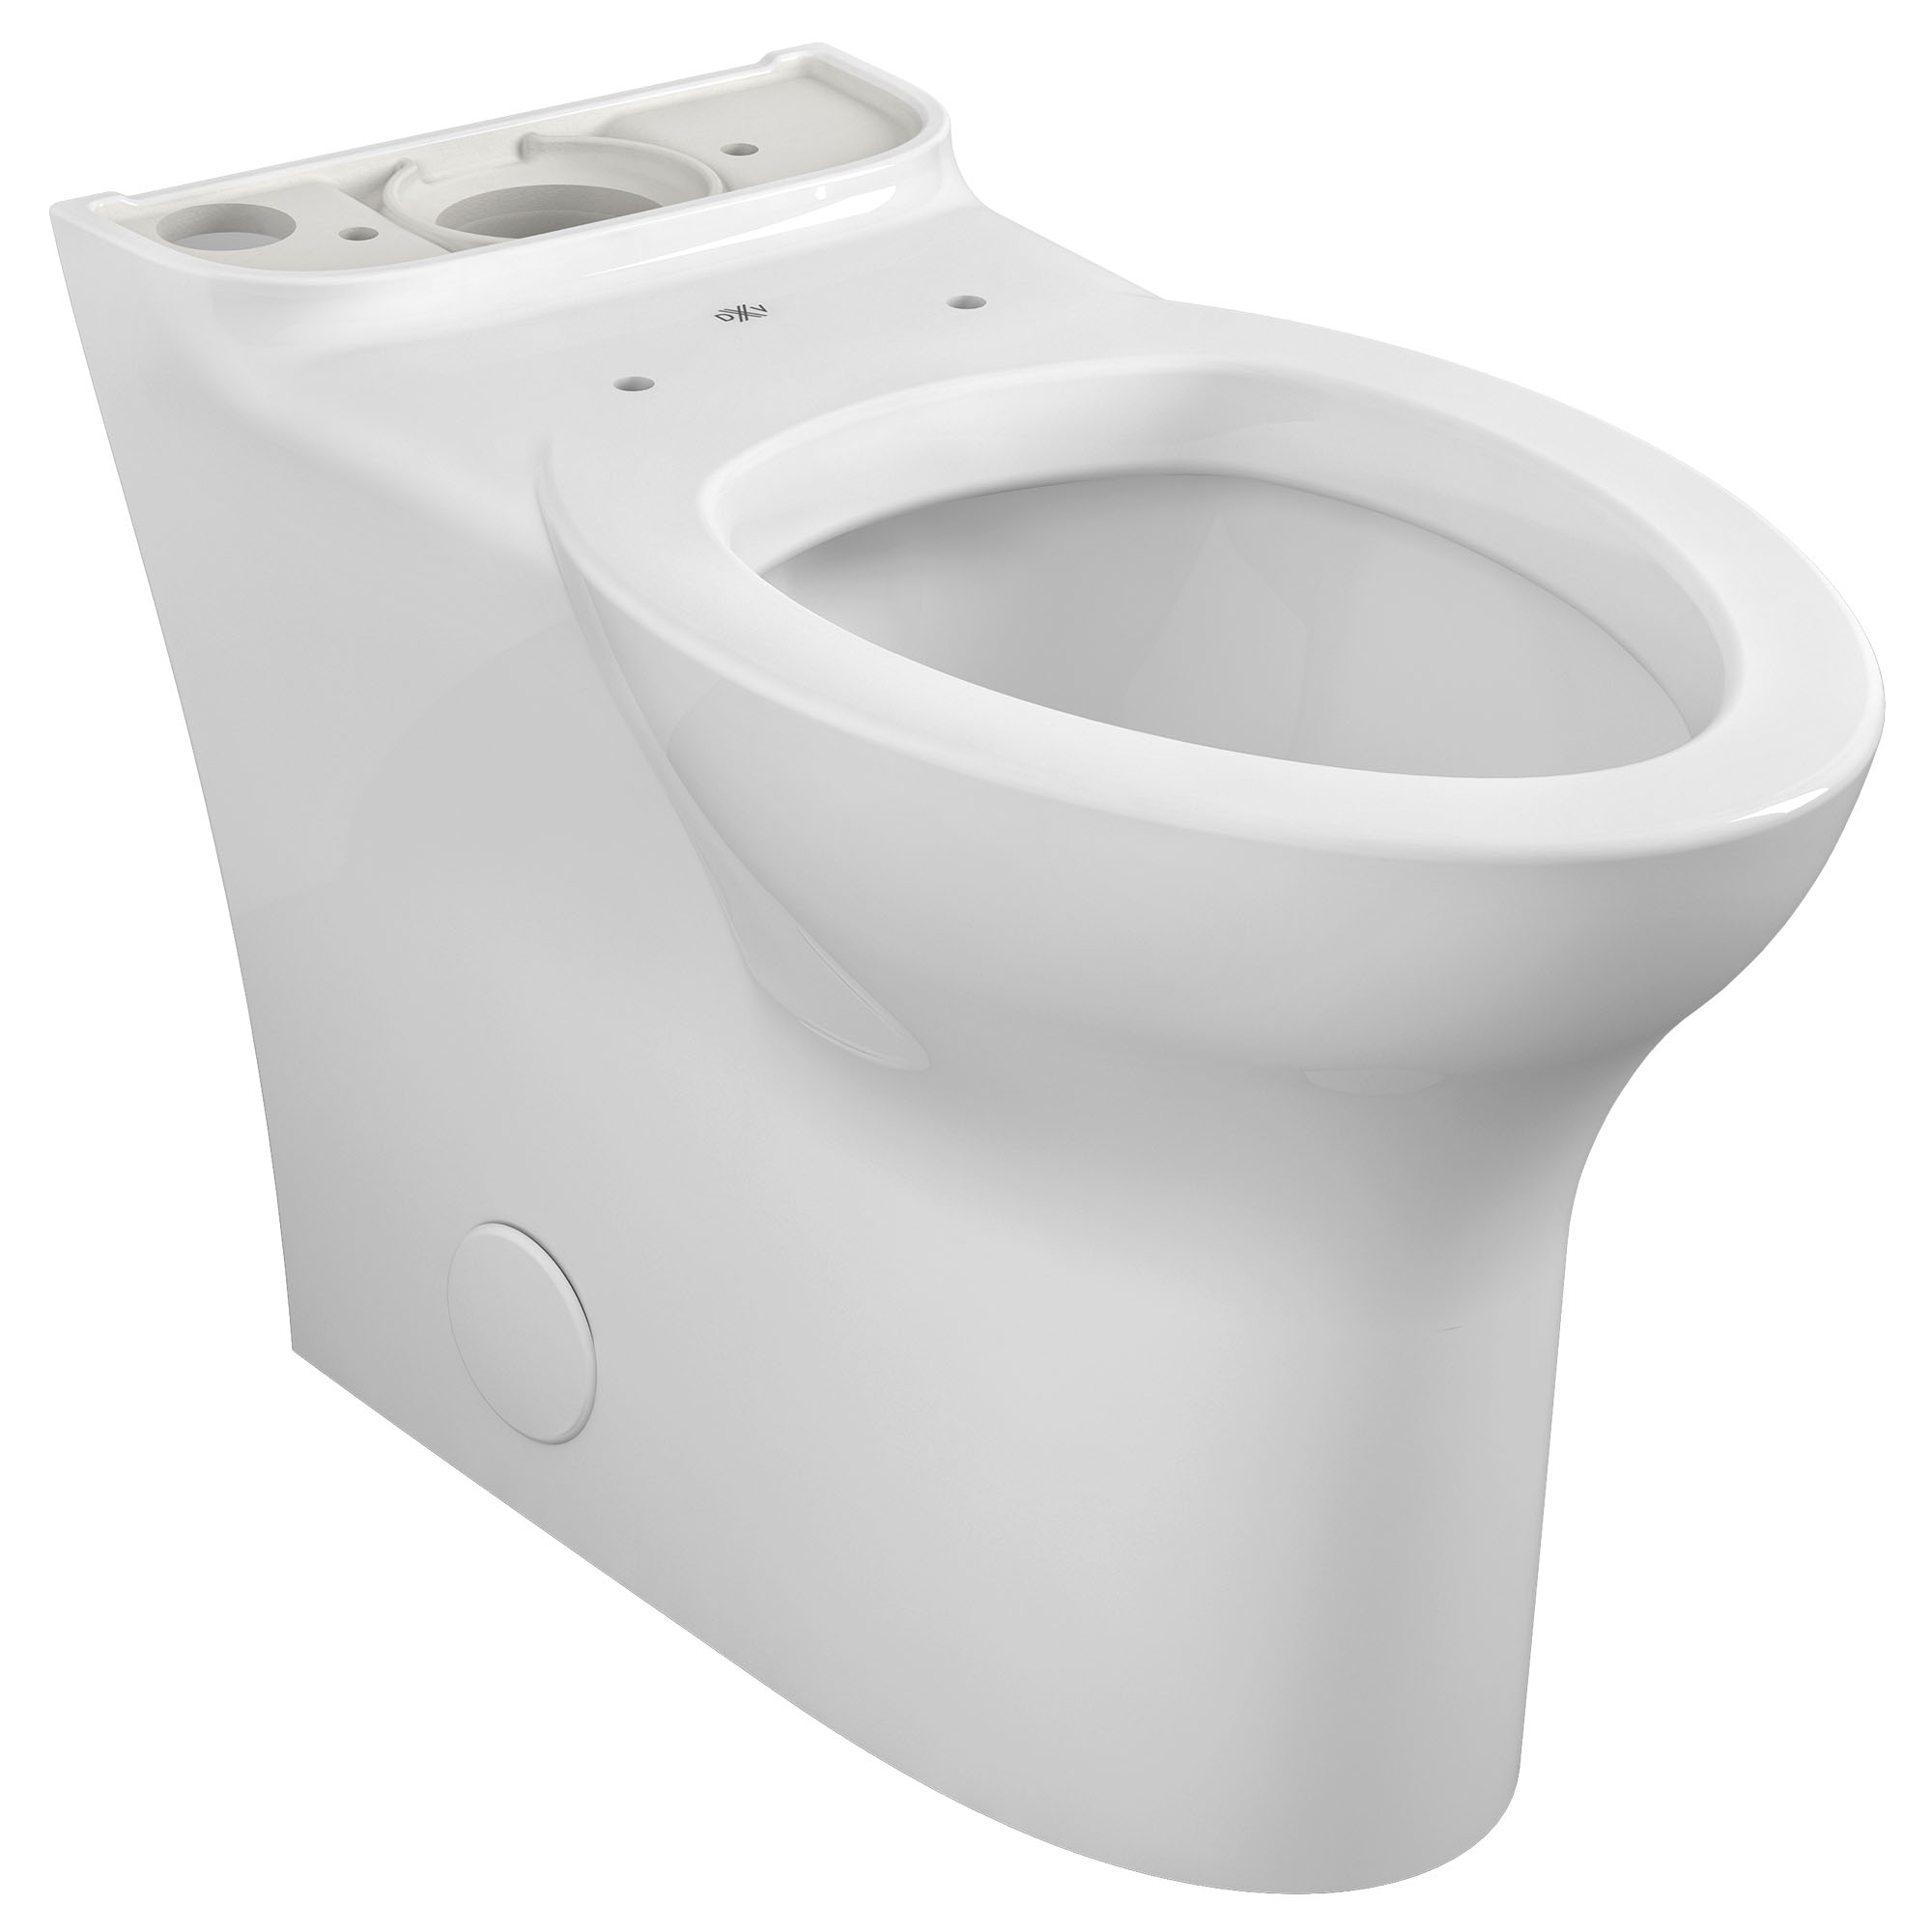 Equility Chair Height Elongated Toilet Bowl with Seat